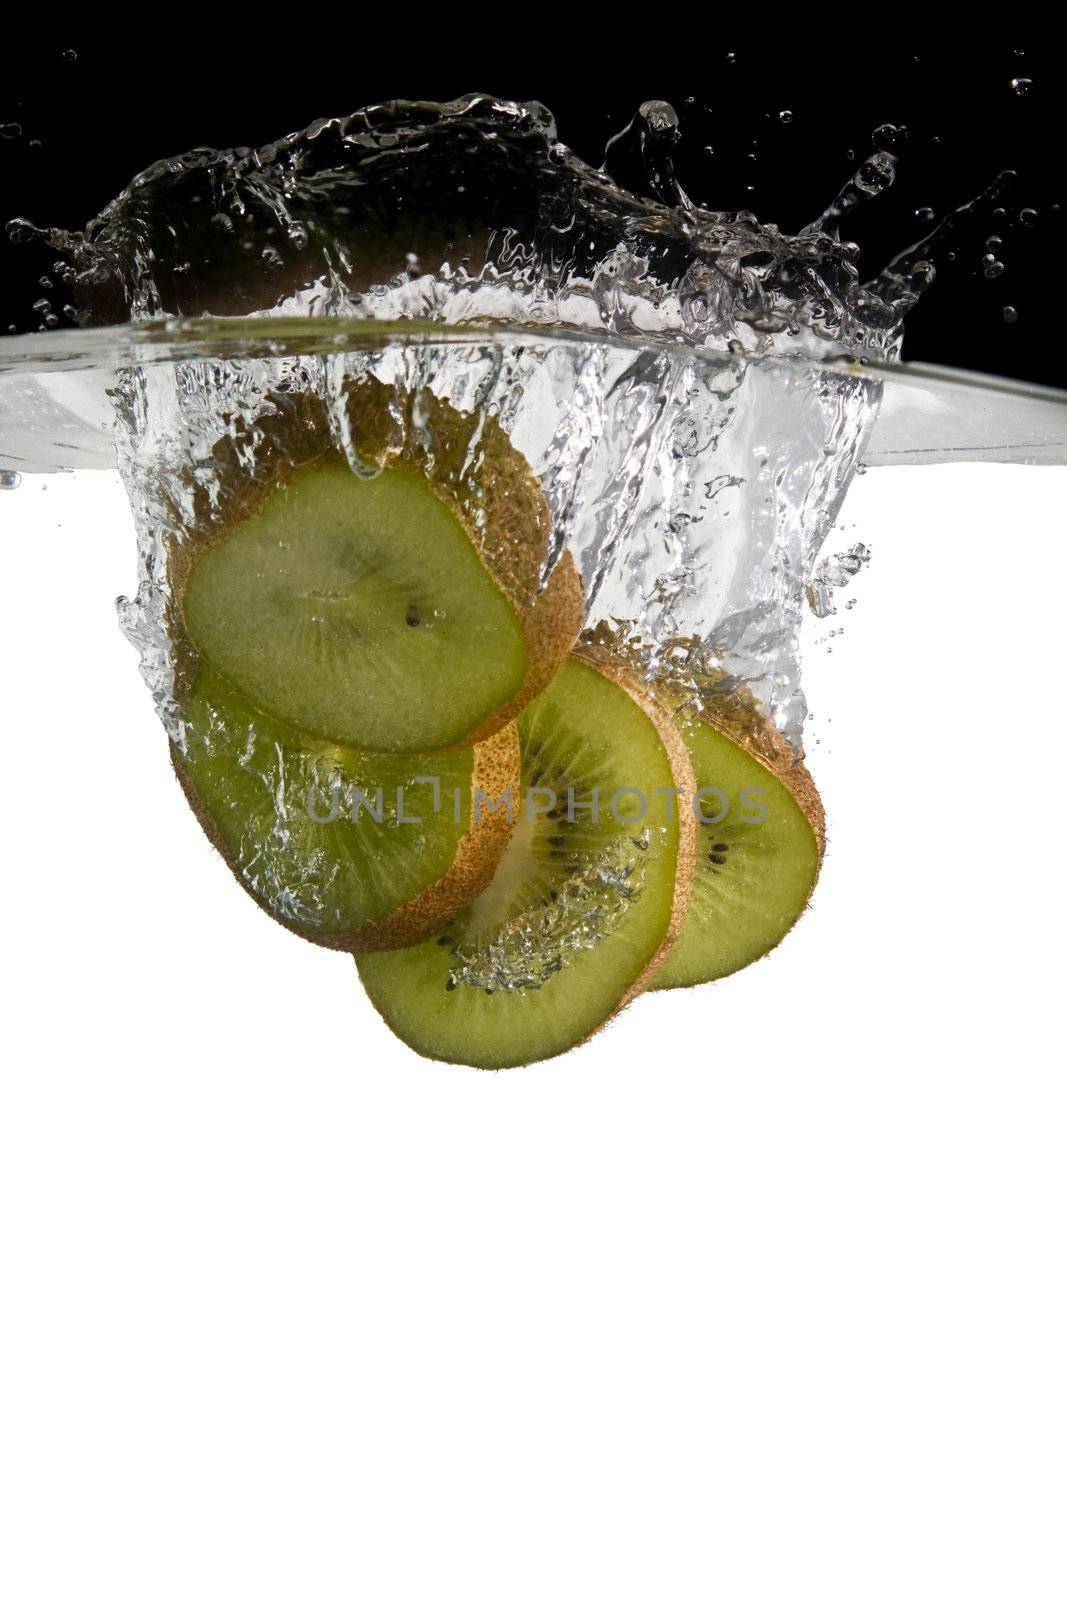 Kiwifruit slices in water by RobStark